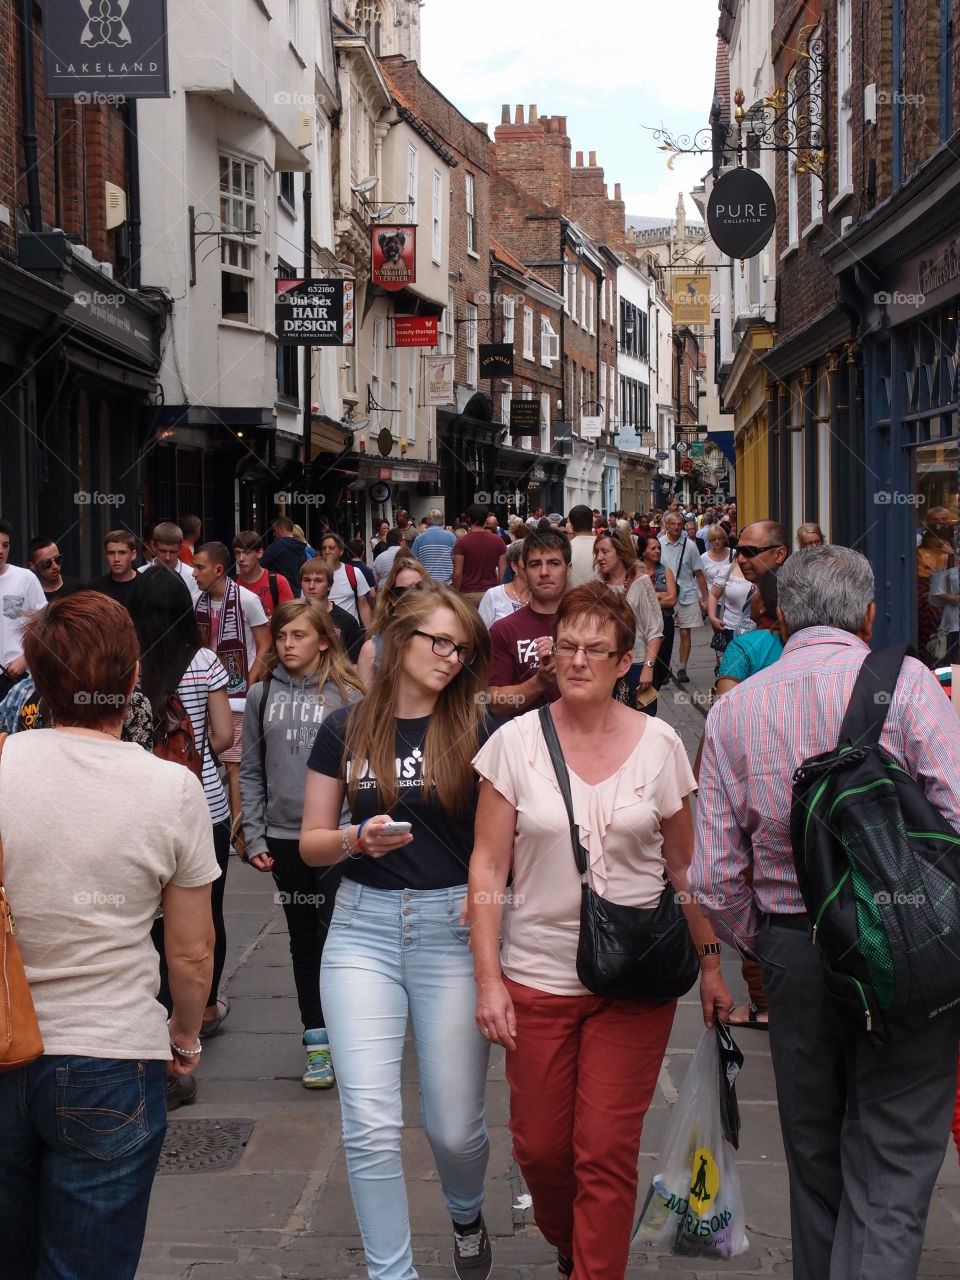 Crowds of people walking through shopping districts in An English town on a sunny summer day. 